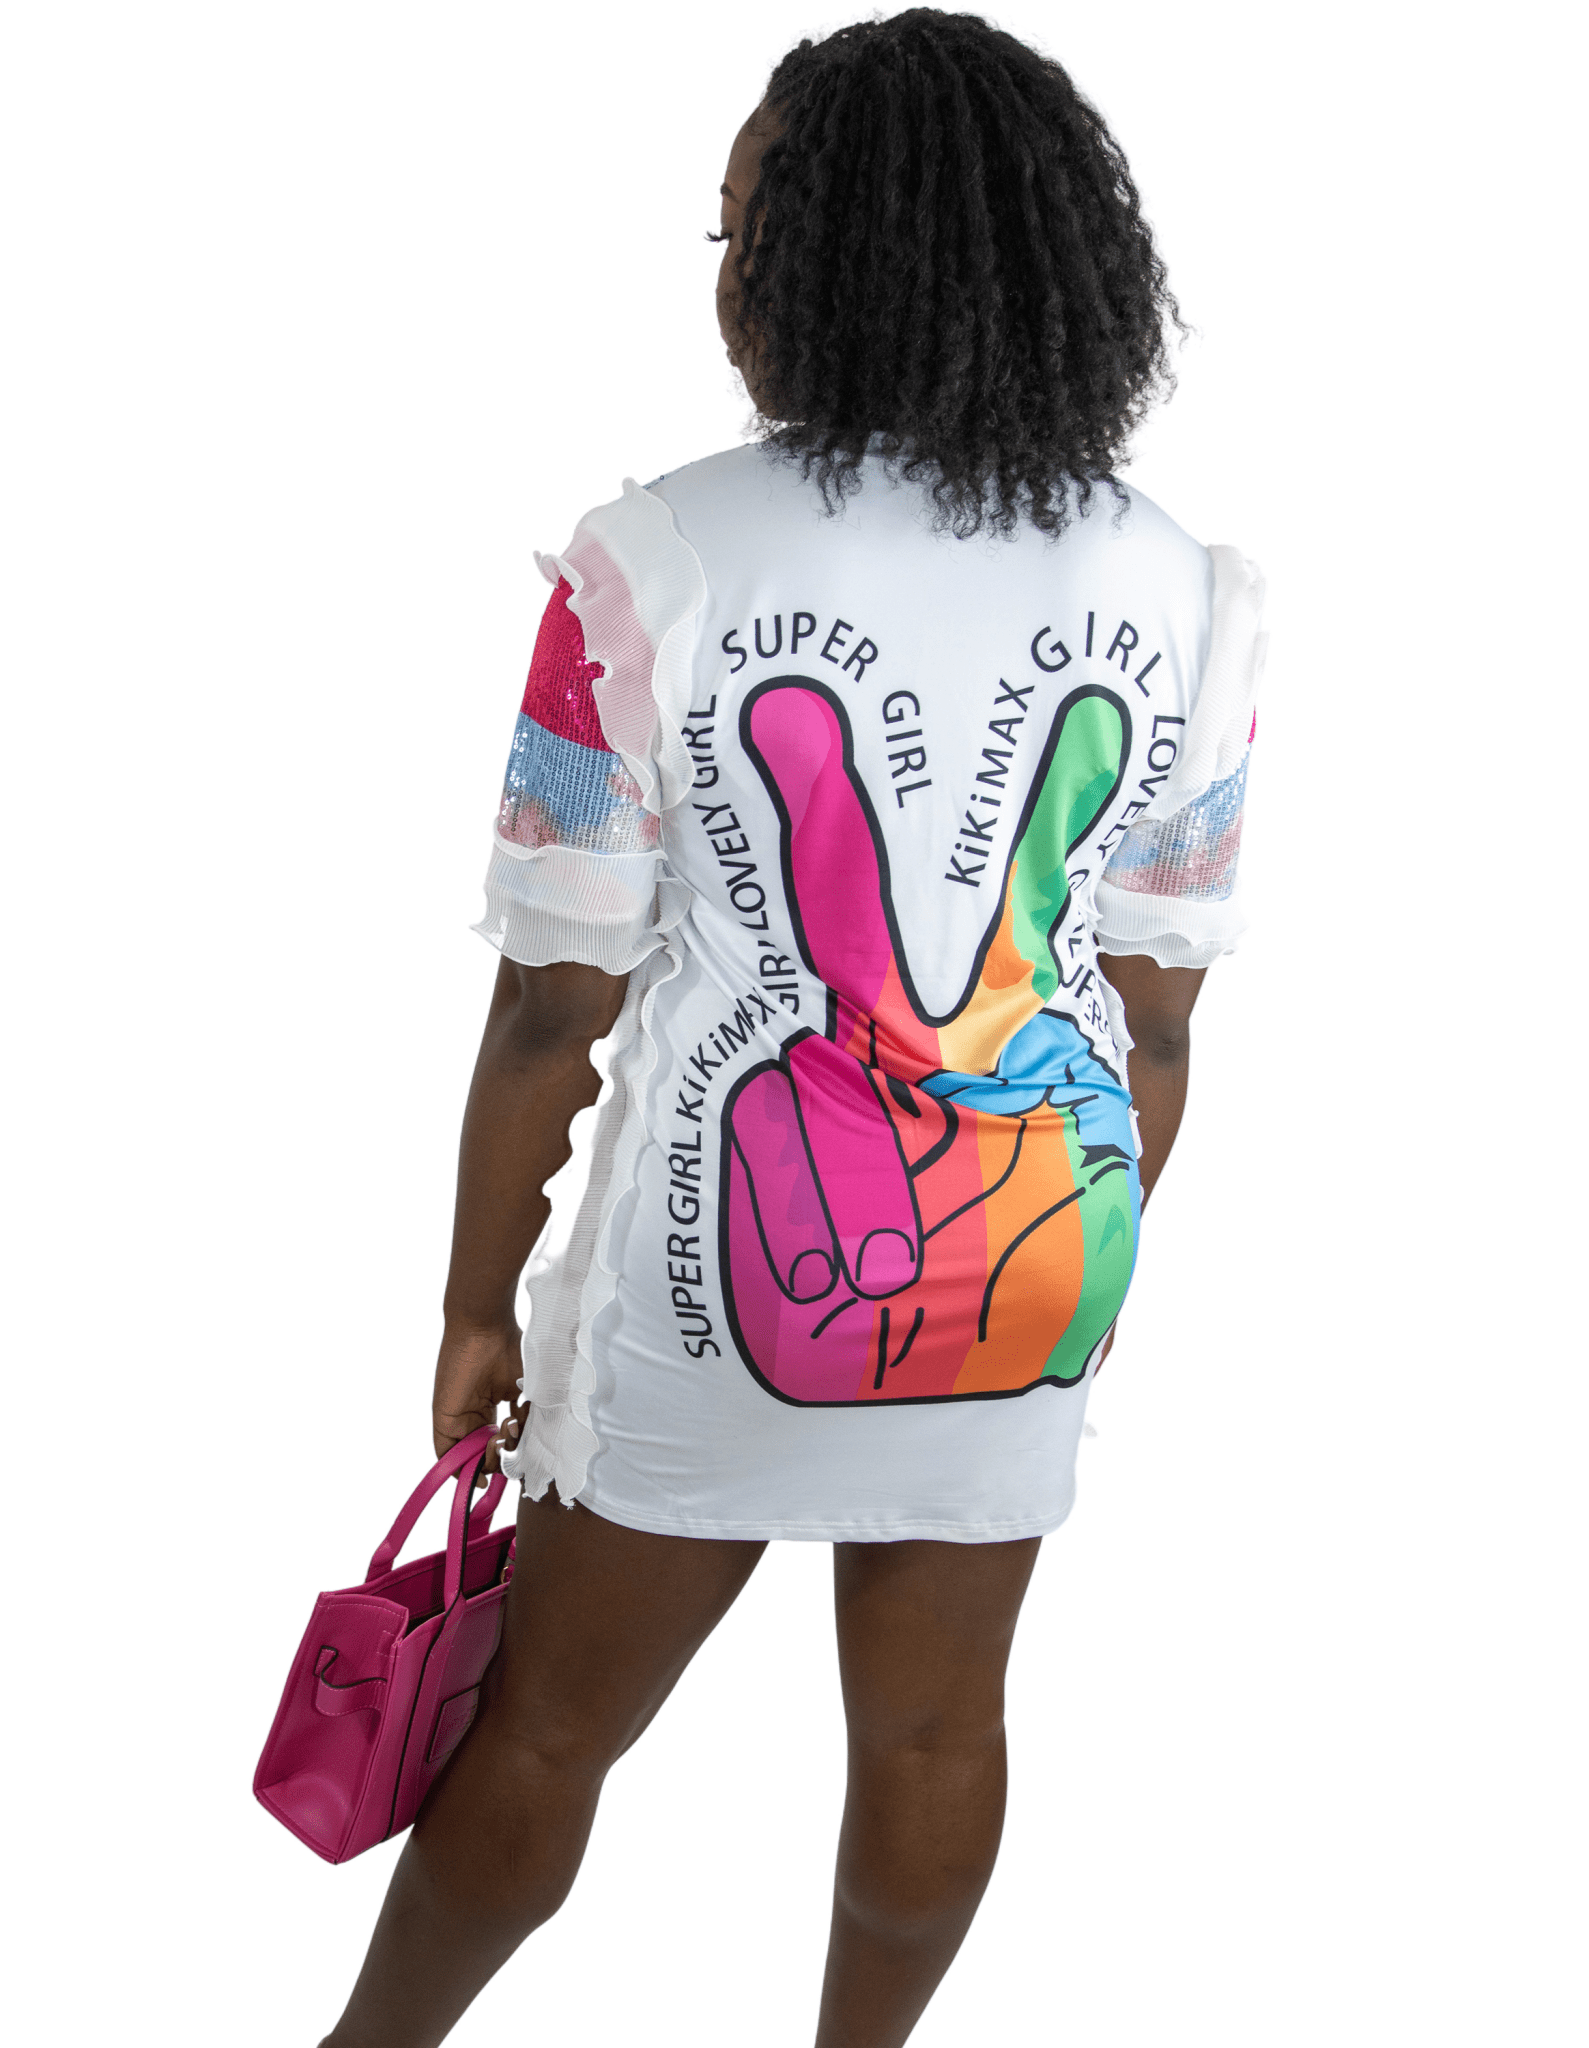 
  
  See Me Dress: Colorful Sequin Short Sleeve Shift Dress with Text Design
  
